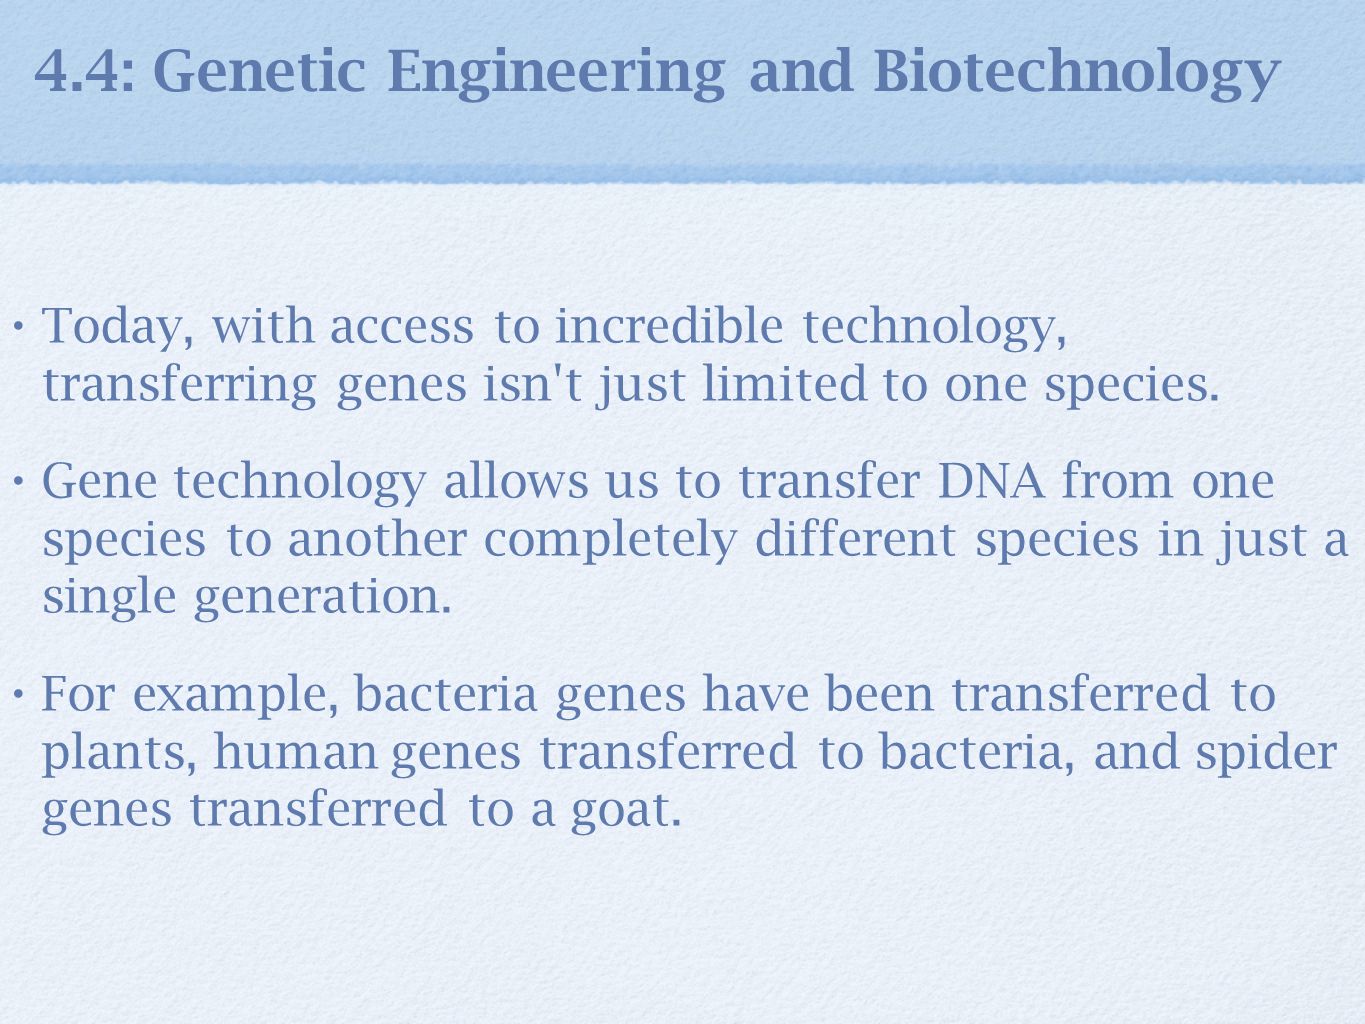 Genetic engineering of animals: Ethical issues, including welfare concerns